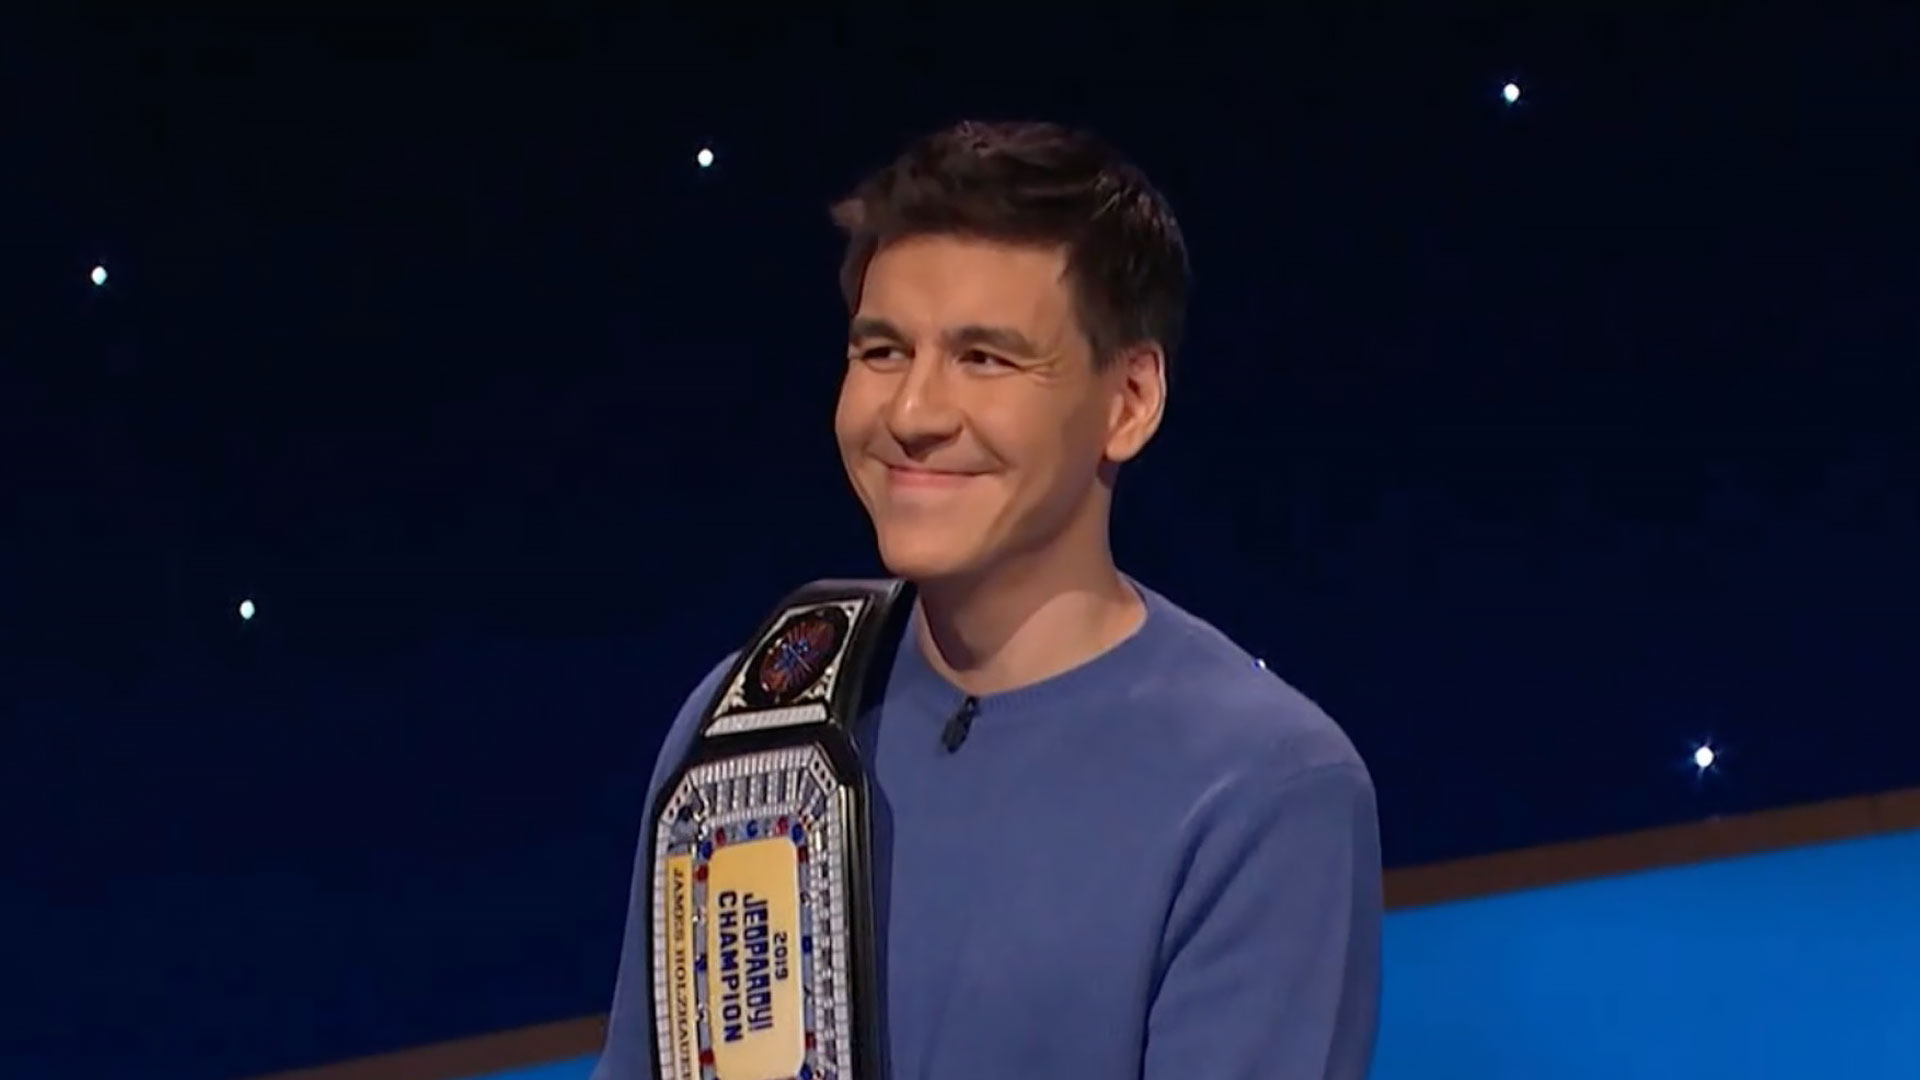 Jeopardy! fans say James Holzhauer will ‘smash’ contestant in Masters who once bragged about ‘being smarter than him’ [Video]